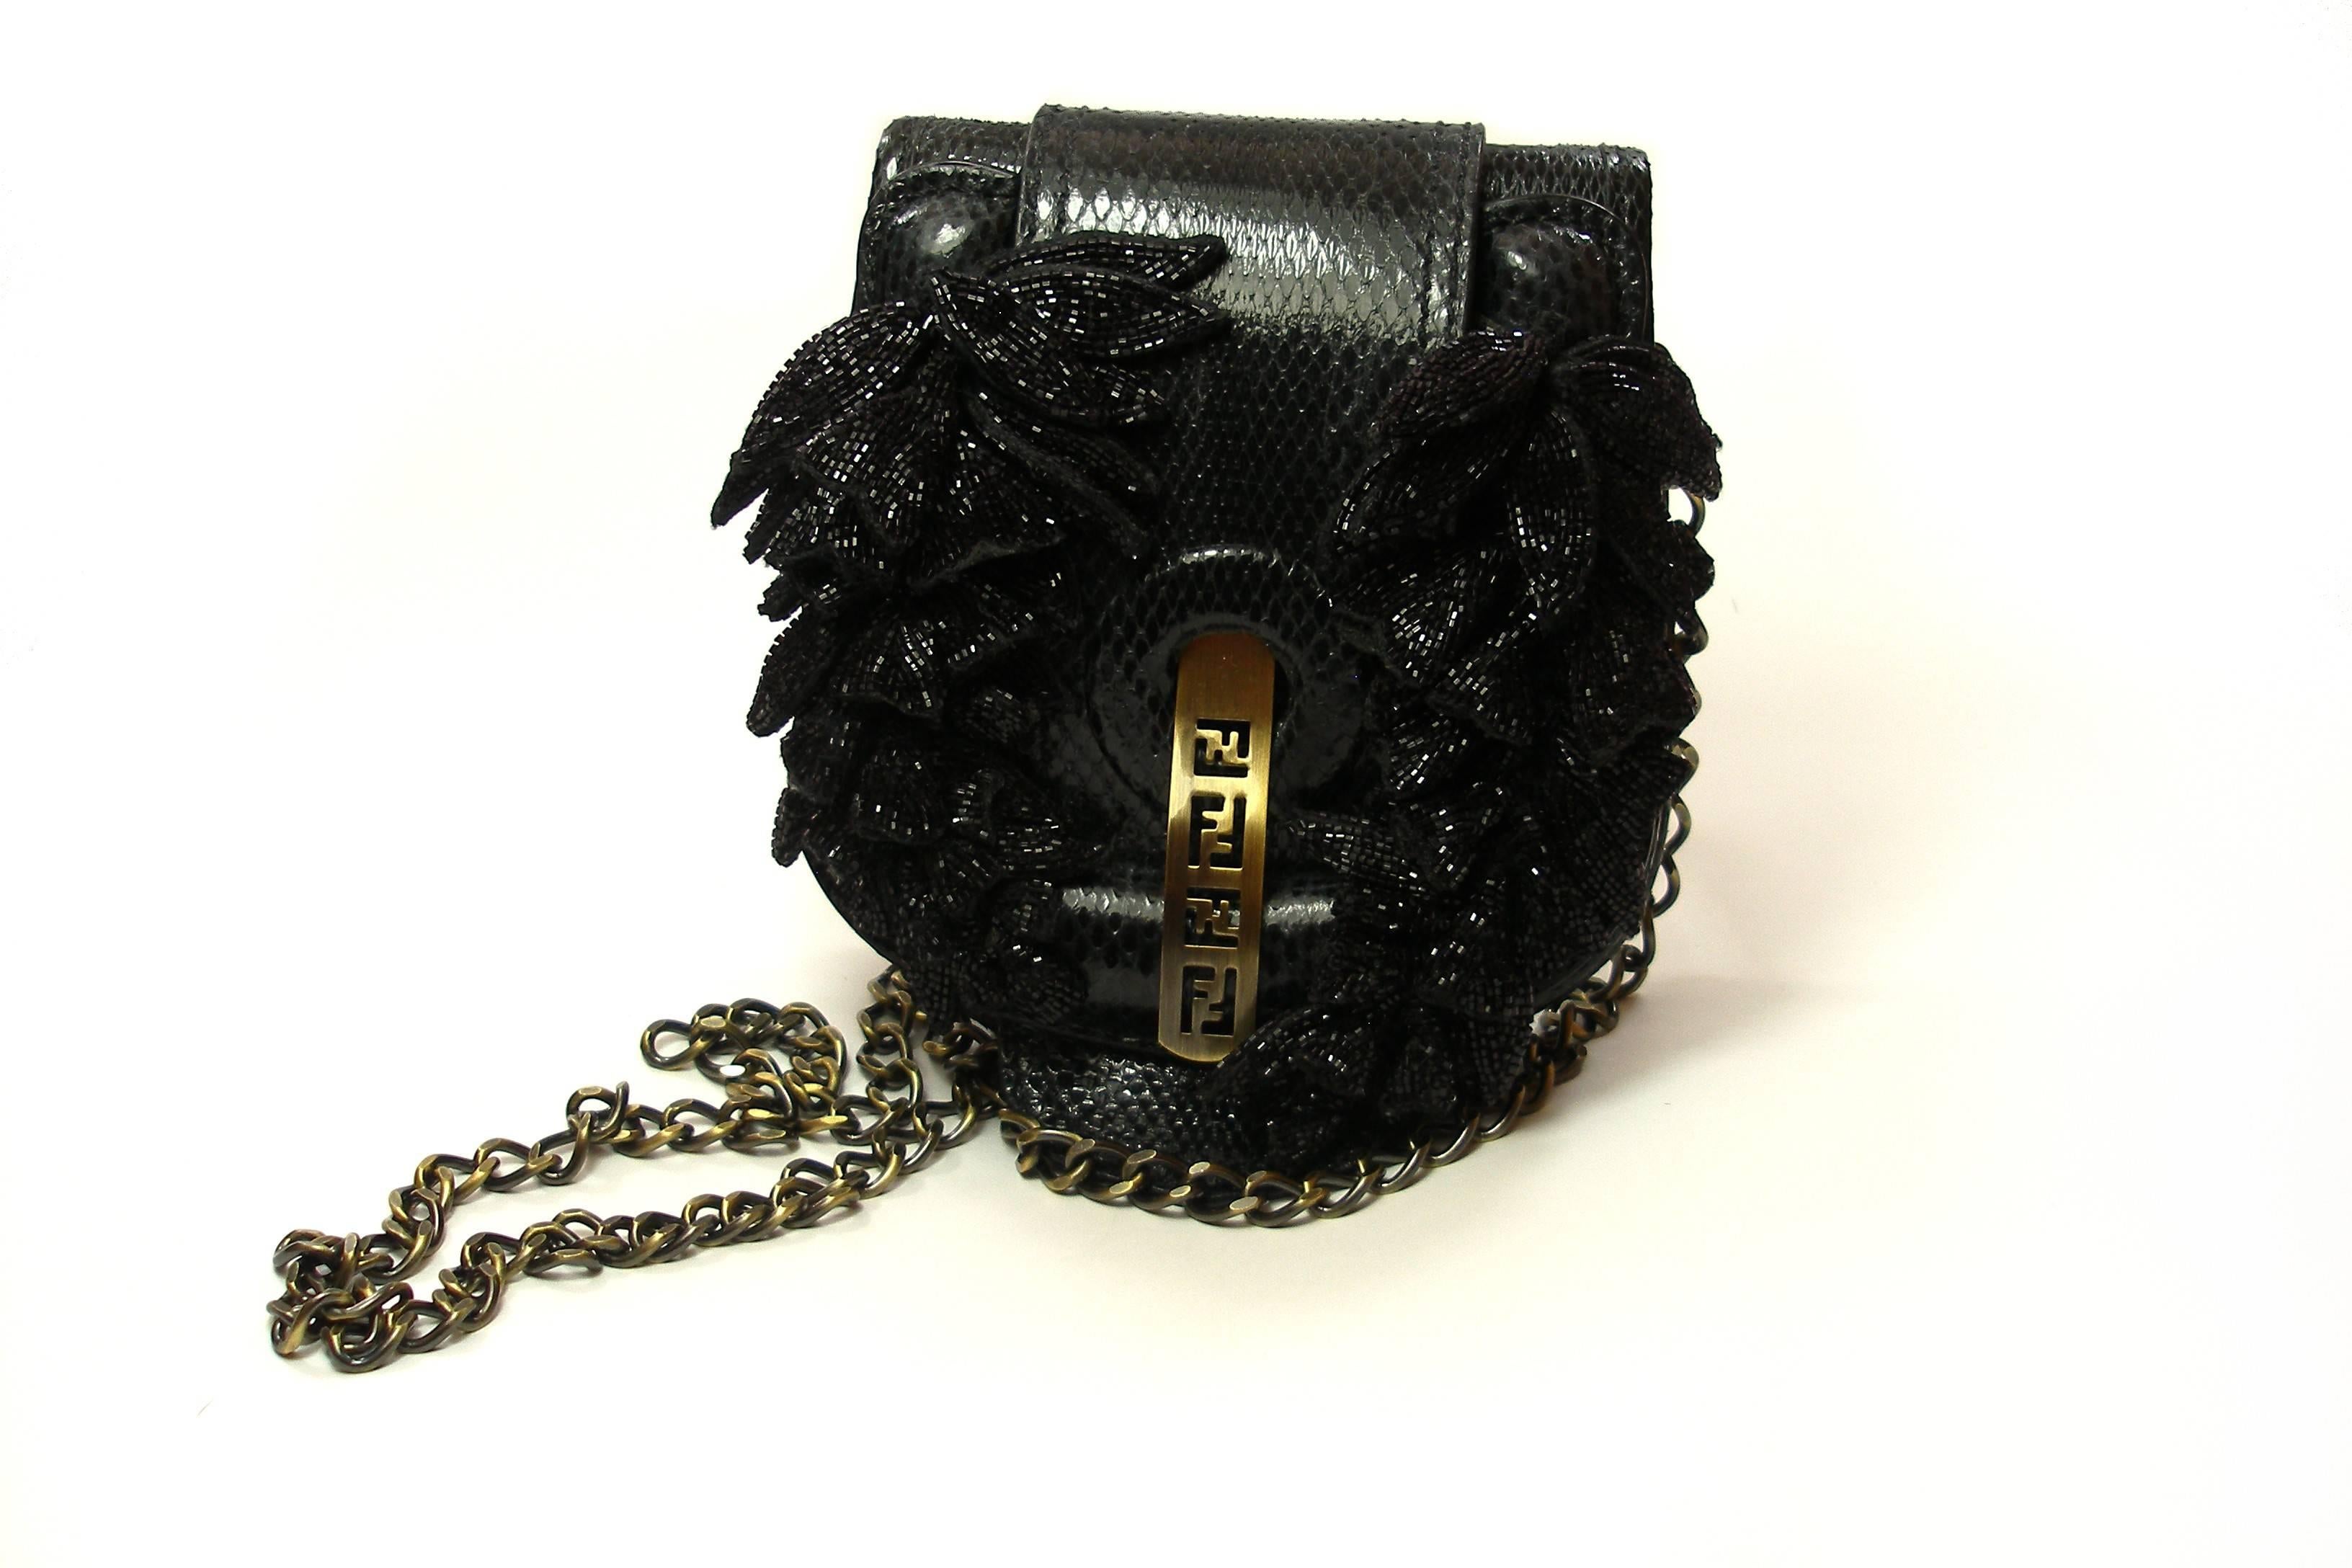 RARE Impossible to find Fendi
Lizard skin and beaded flower
Black color 
PLEASE NOTE THAT ALL BEADS ARE IN TACT this bag was never used and is in excellente condition.
There are two optional chains for carrying the bag, a shorter one that measures